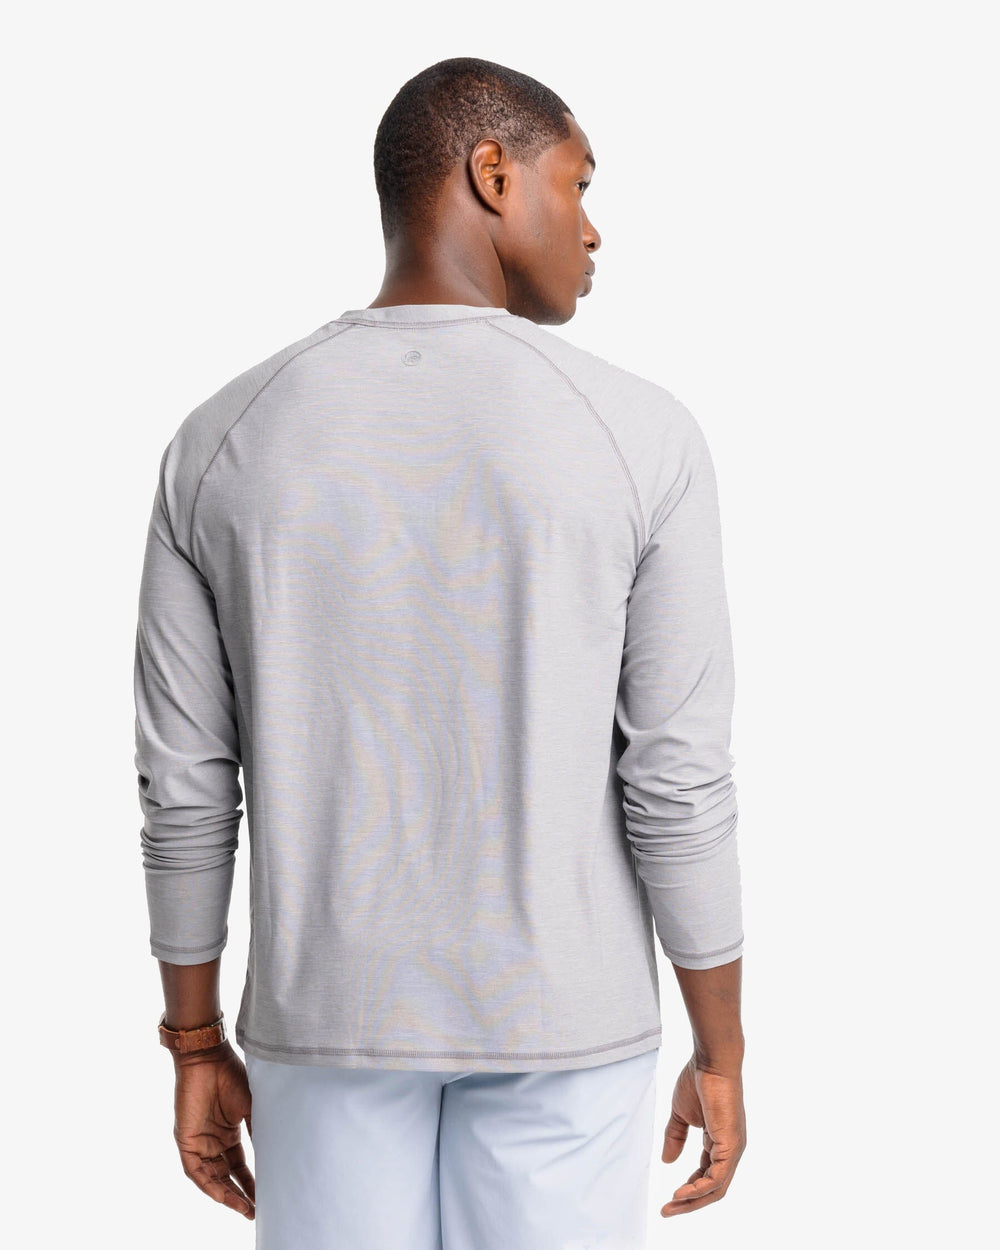 The back view of the Southern Tide brrr-illiant Performance Long Sleeve Tee by Southern Tide - Steel Grey